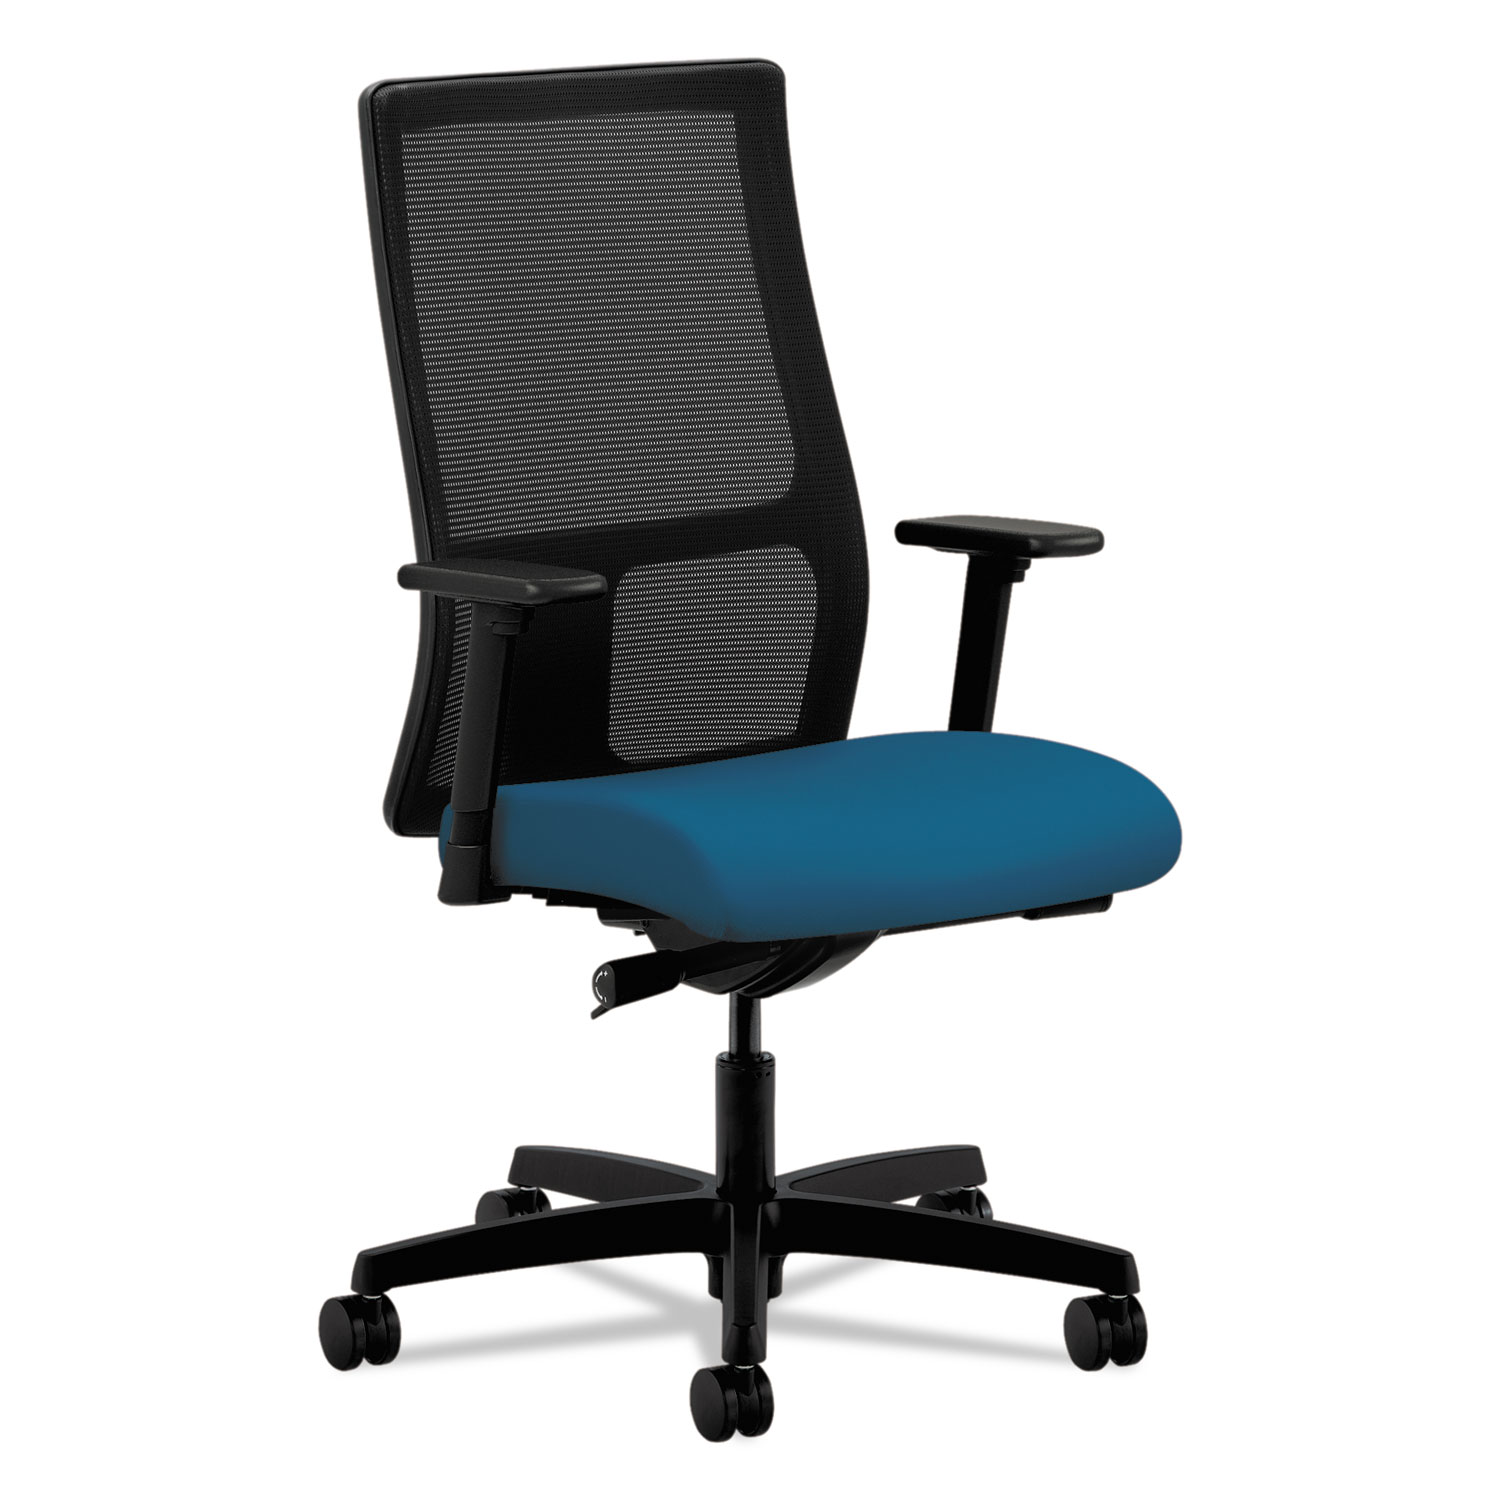  HON HIWM2.A.H.M.CU97.T.SB Ignition Series Mesh Mid-Back Work Chair, Supports up to 300 lbs., Peacock Seat/Black Back, Black Base (HONIW103CU97) 